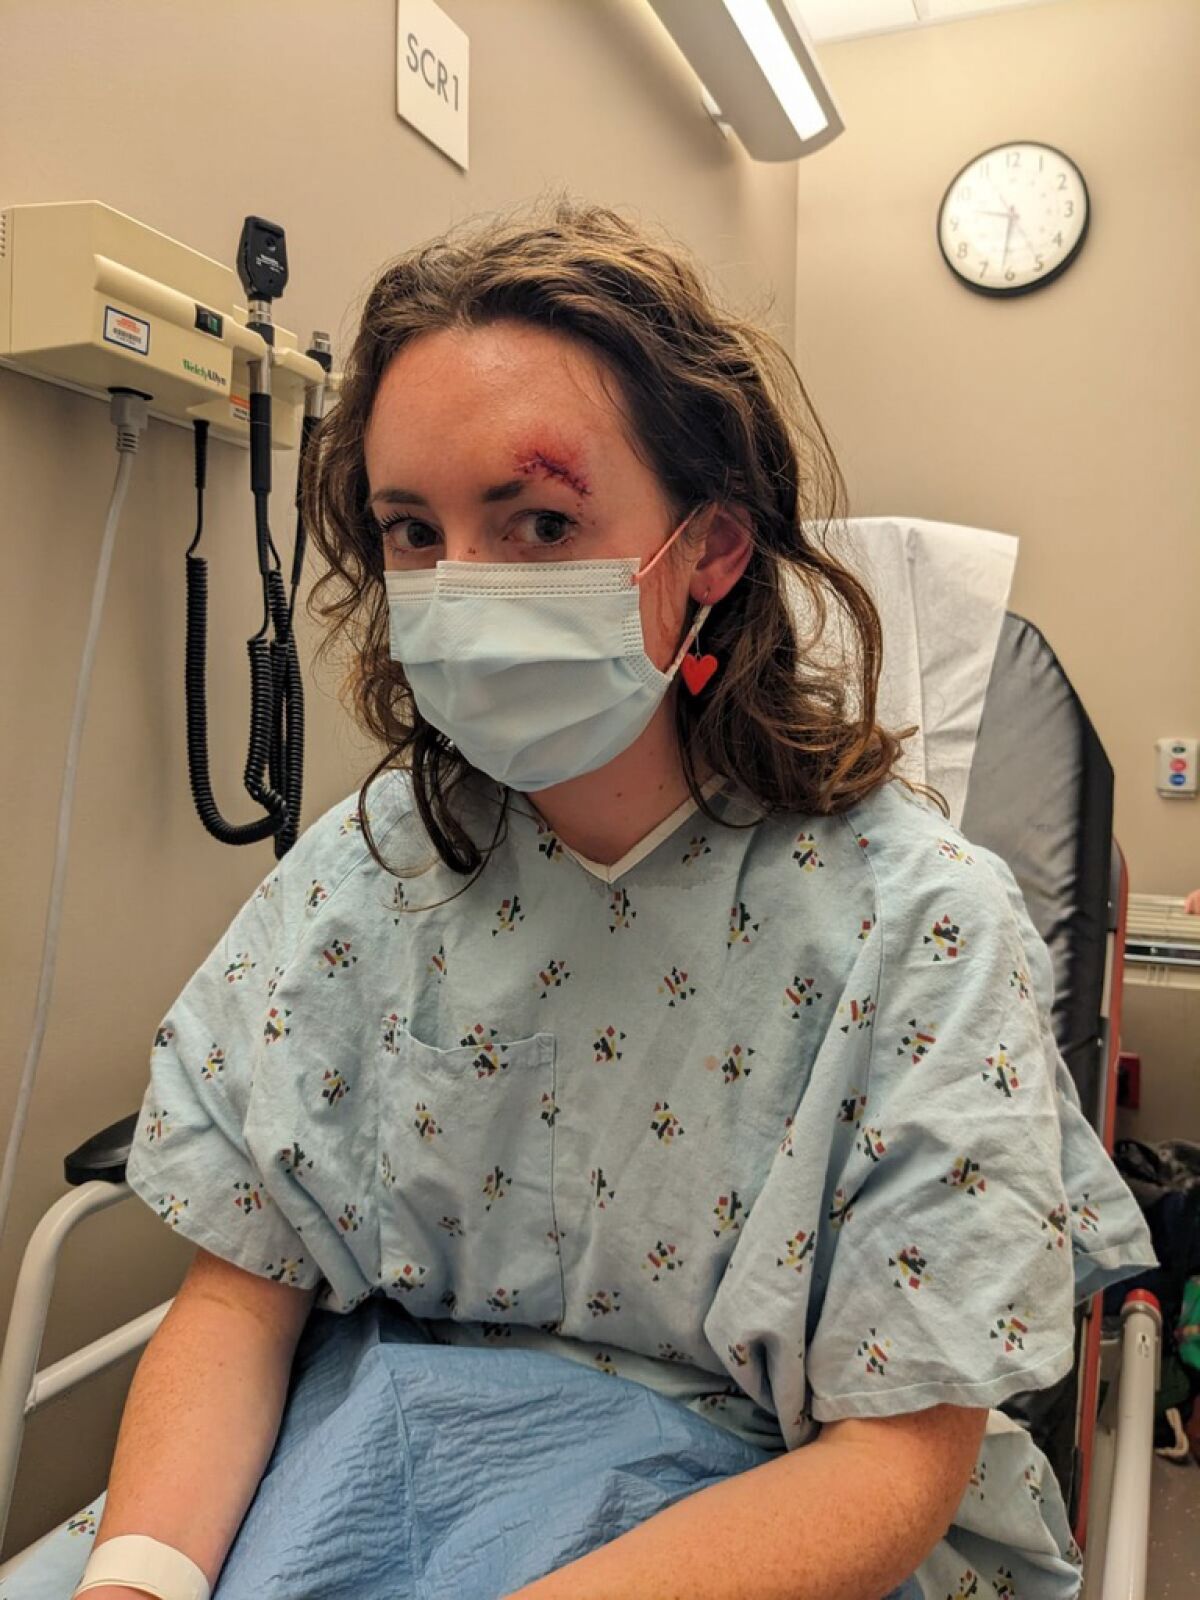 A woman in a hospital smock and face mask sitting in a medical room has stitches above one eyebrow.